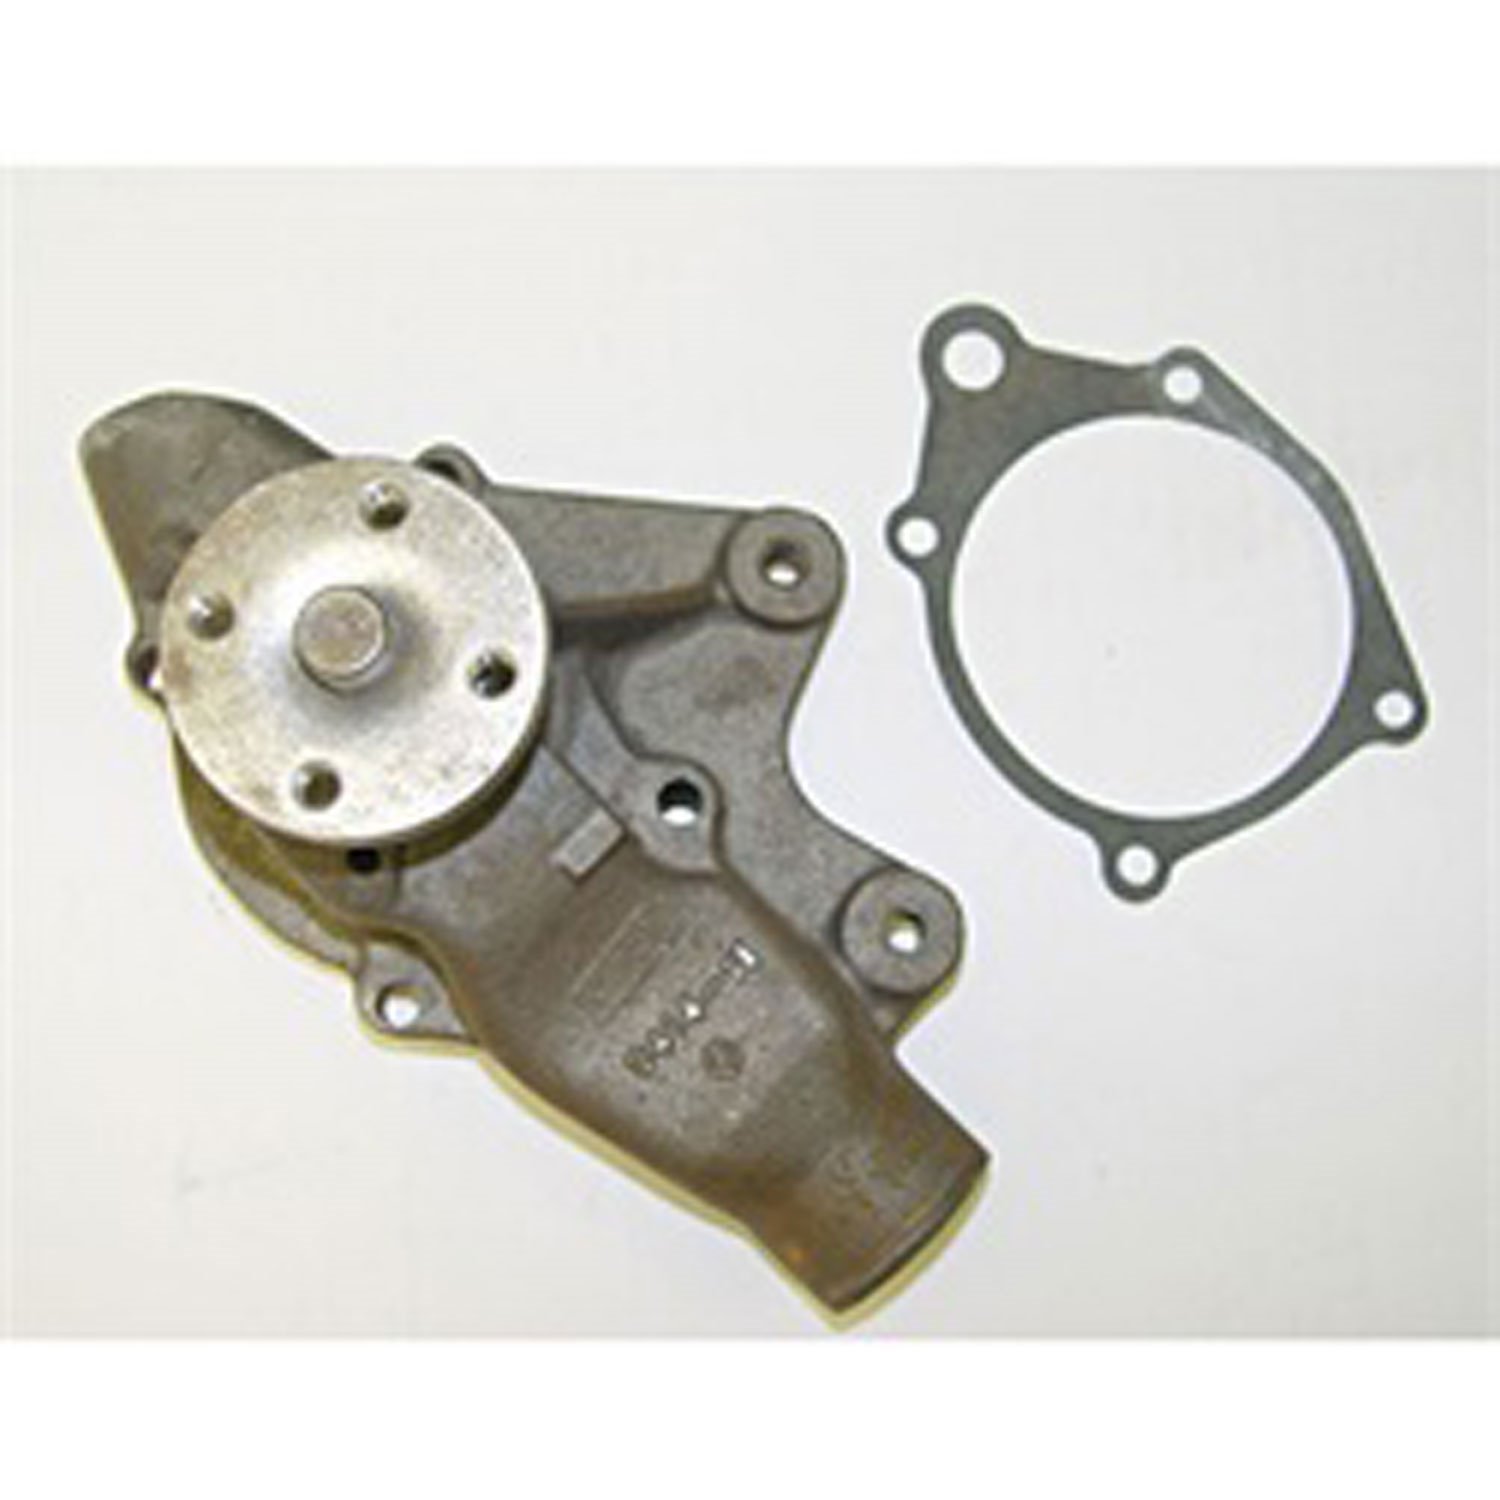 Replacement water pump from Omix-ADA, Fits 87-01 Jeep Cherokee XJ and 93-98 ZJ Grand Cherokees w